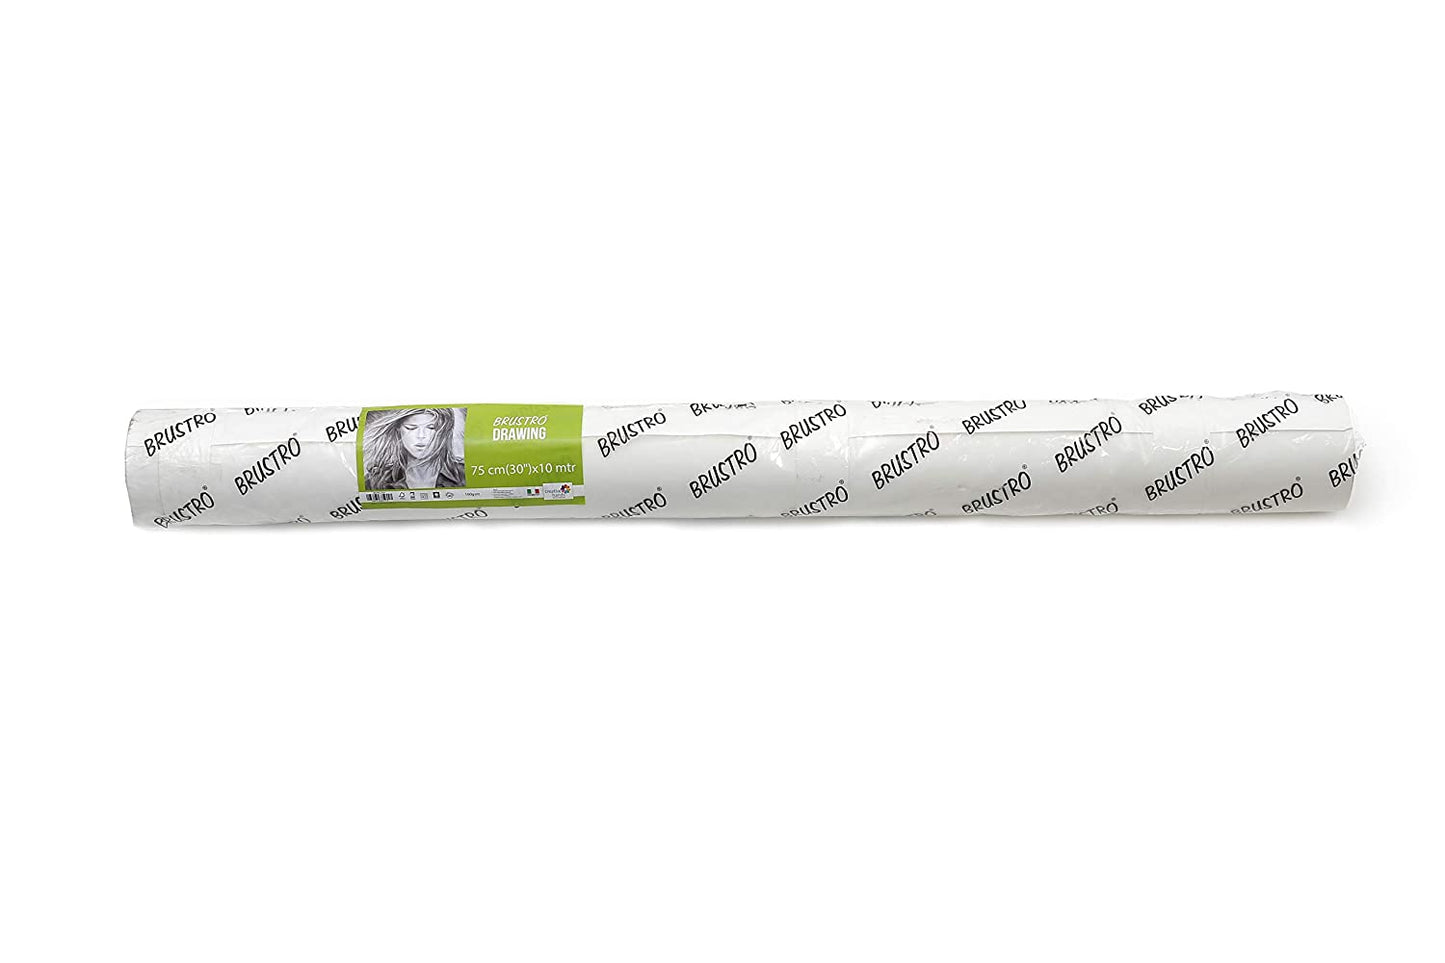 BRUSTRO DRAWING PAPER ROLL 120GSM 75CM(30")X10MTR